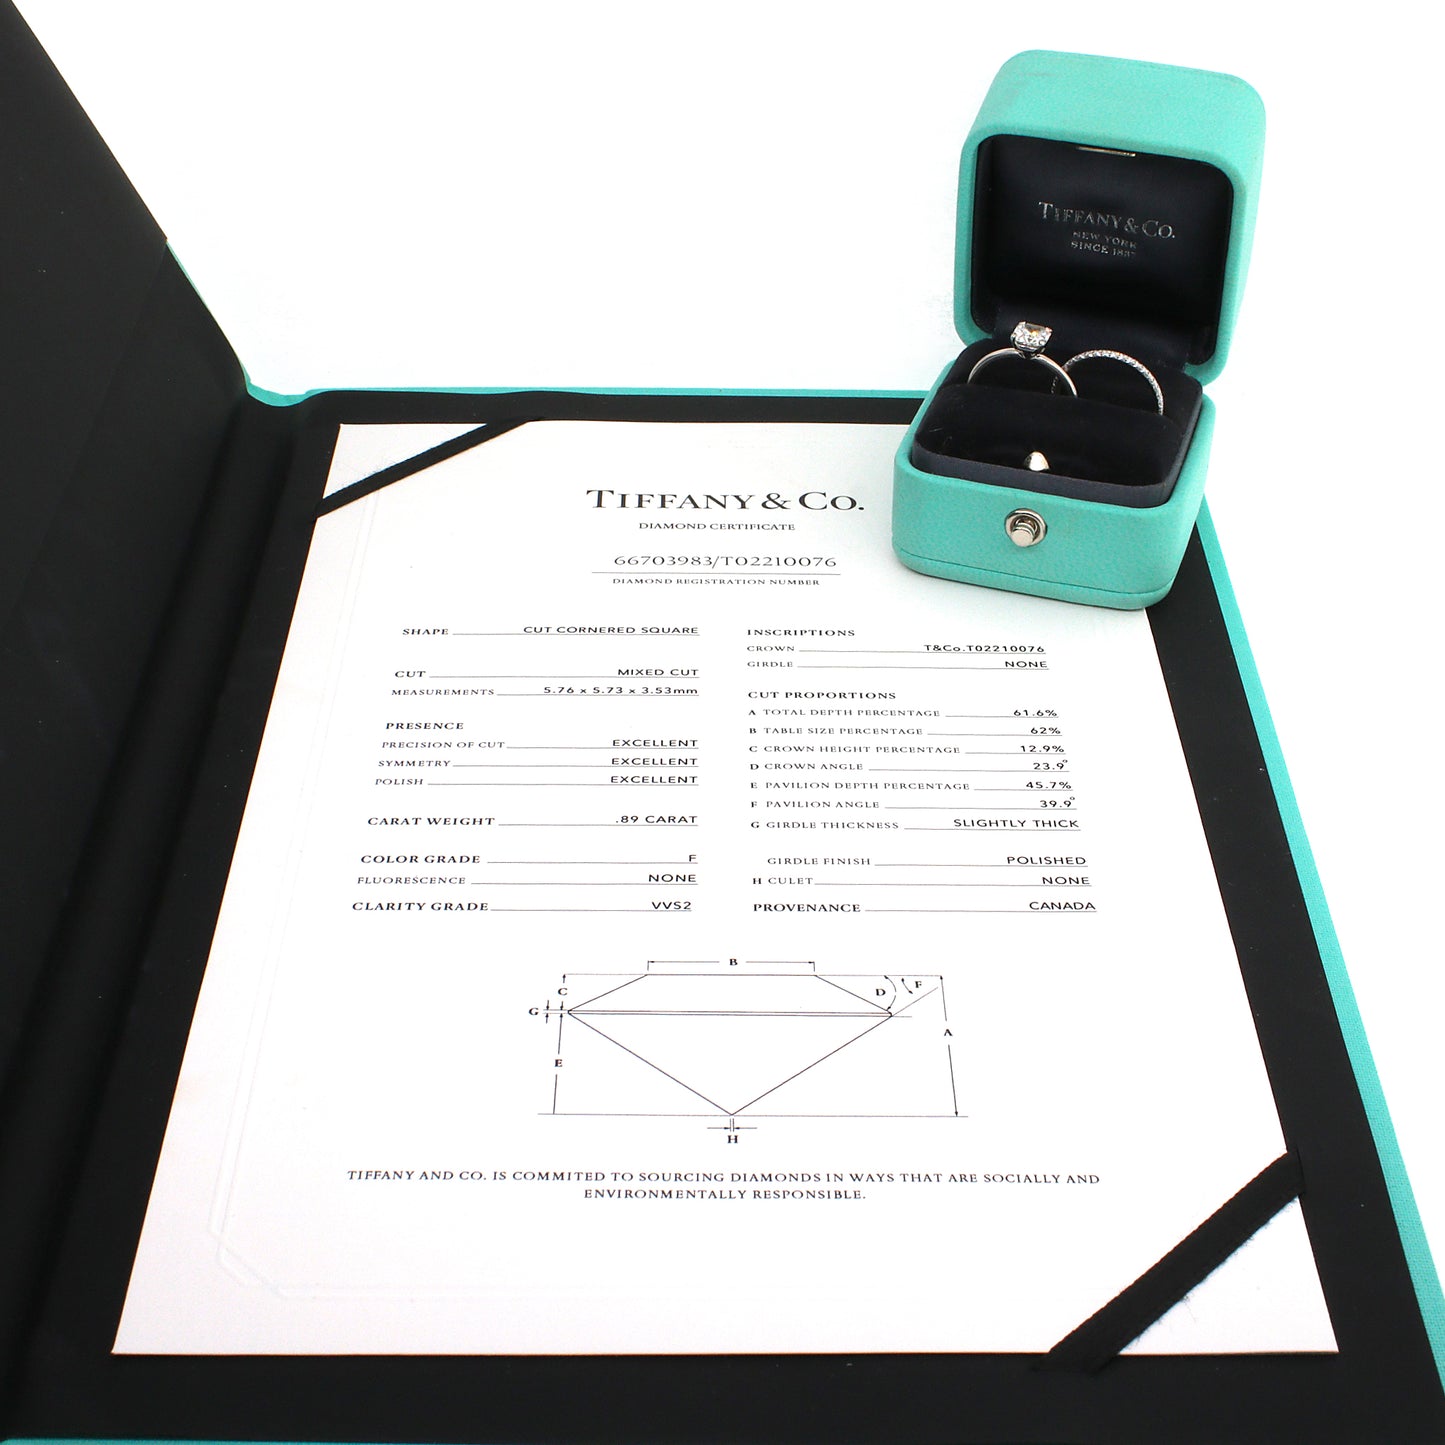 Tiffany and Co. TRUE Diamond Engagement Platinum Ring and Matching Wedding Band